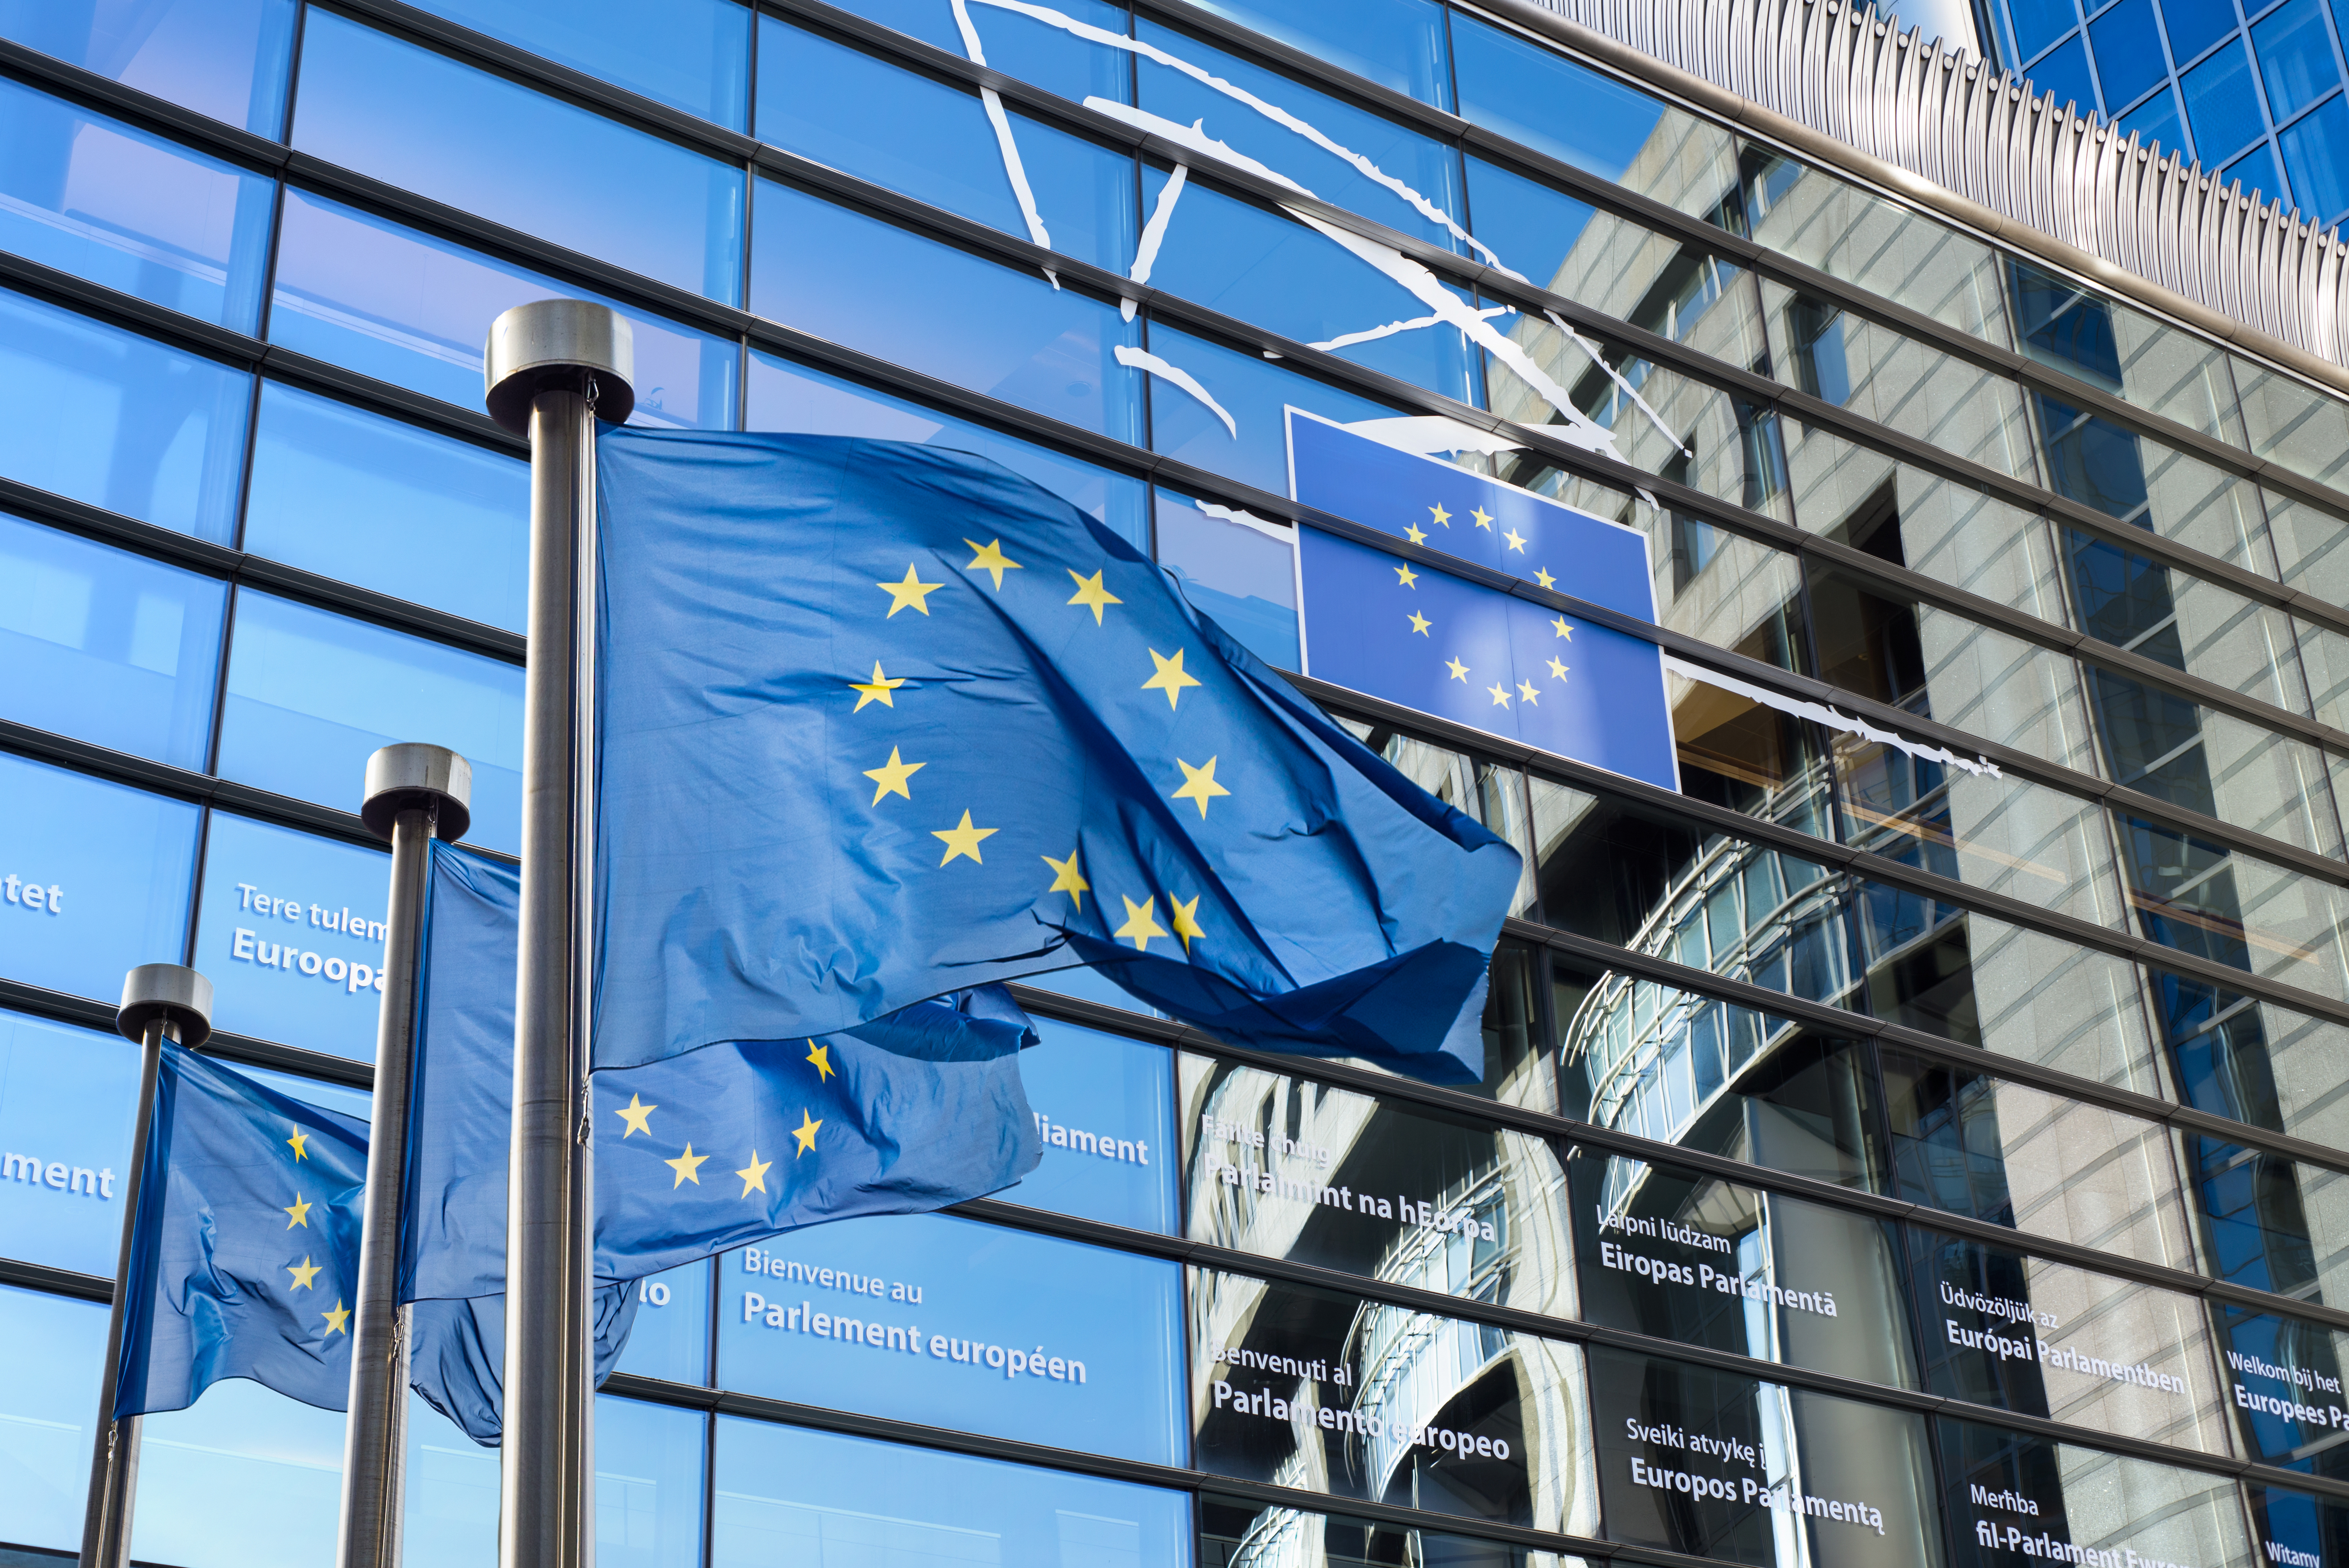 Opinion 01/2022 (pursuant to Article 287(4), TFEU) concerning the Commission’s proposal for a Regulation on the statute and funding of European political parties and European political foundations